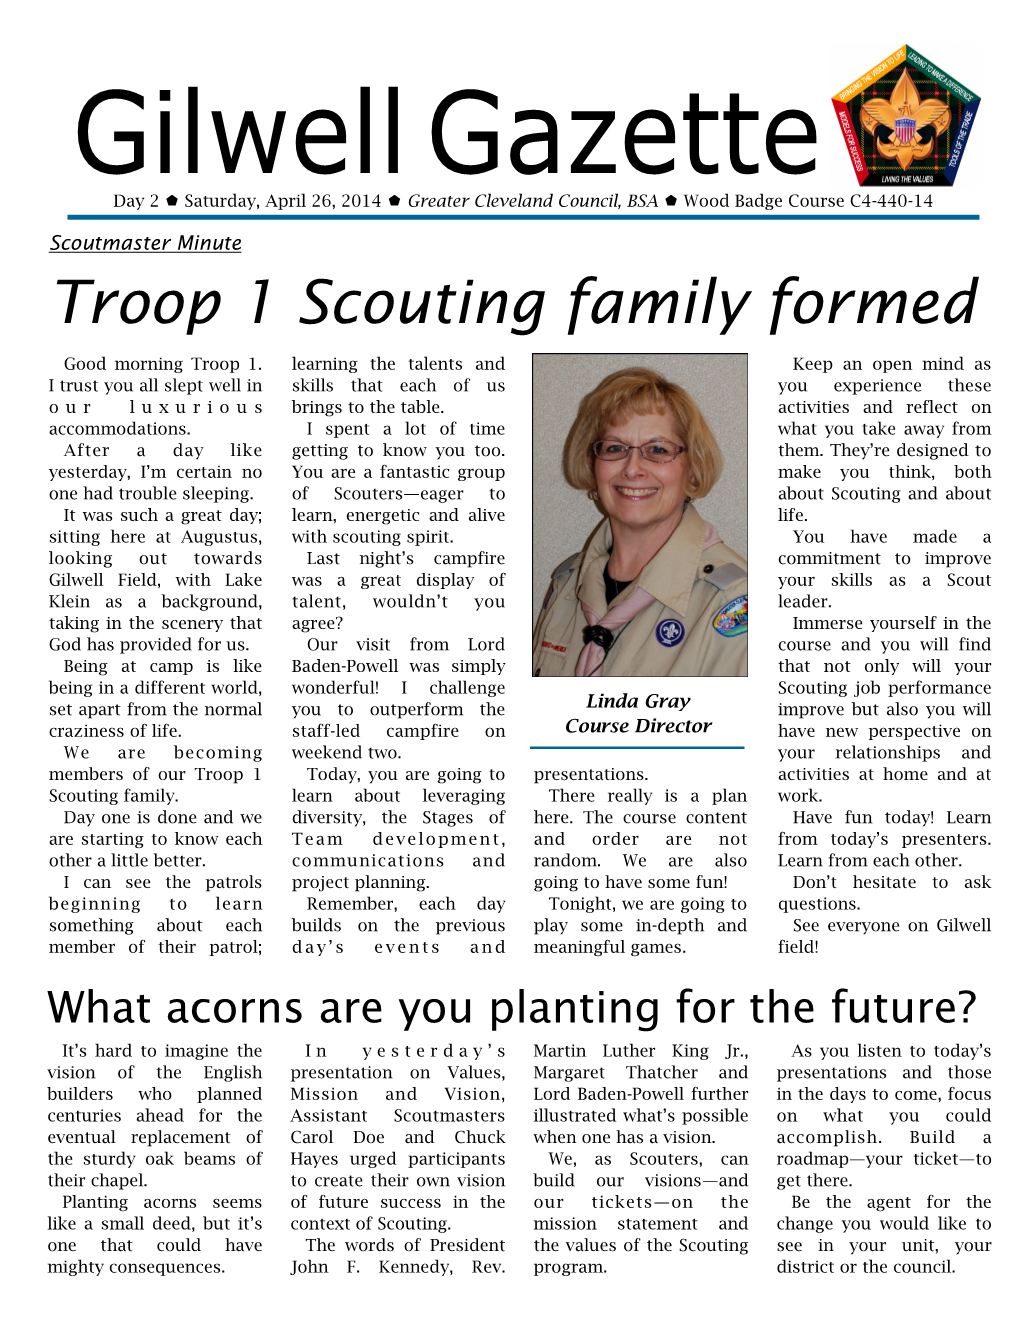 Troop 1 Scouting Family Formed